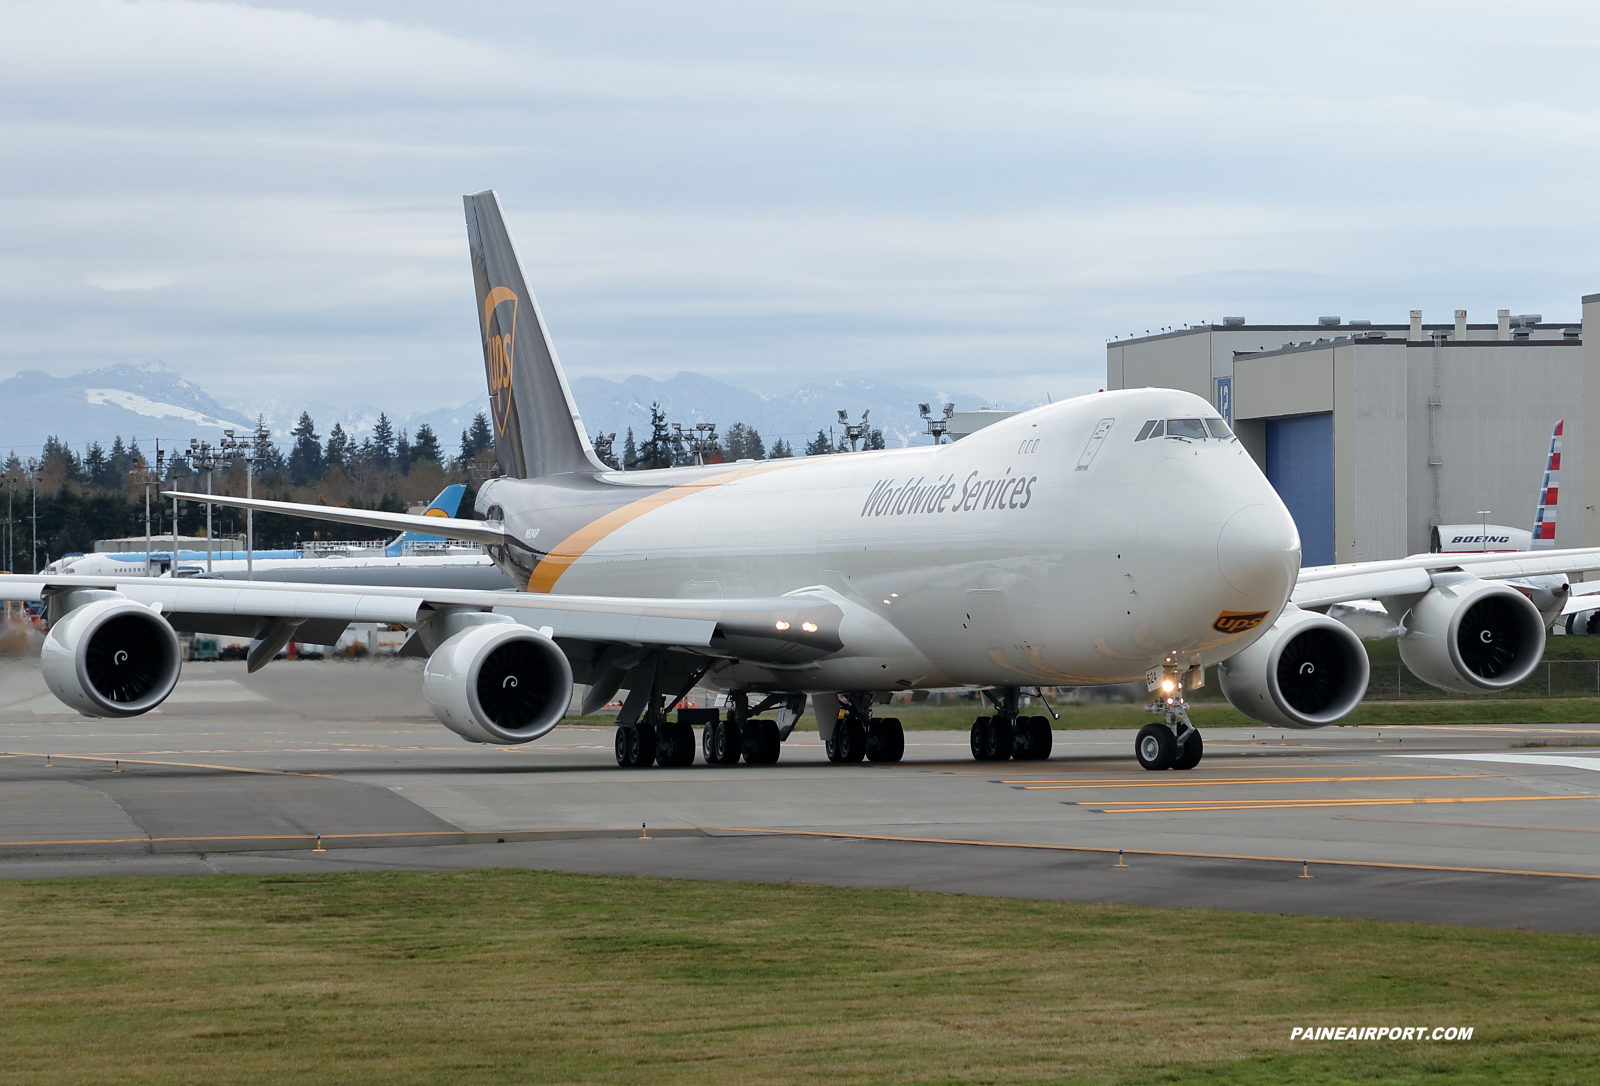 UPS 747-8F N624UP at KPAE Paine Field 